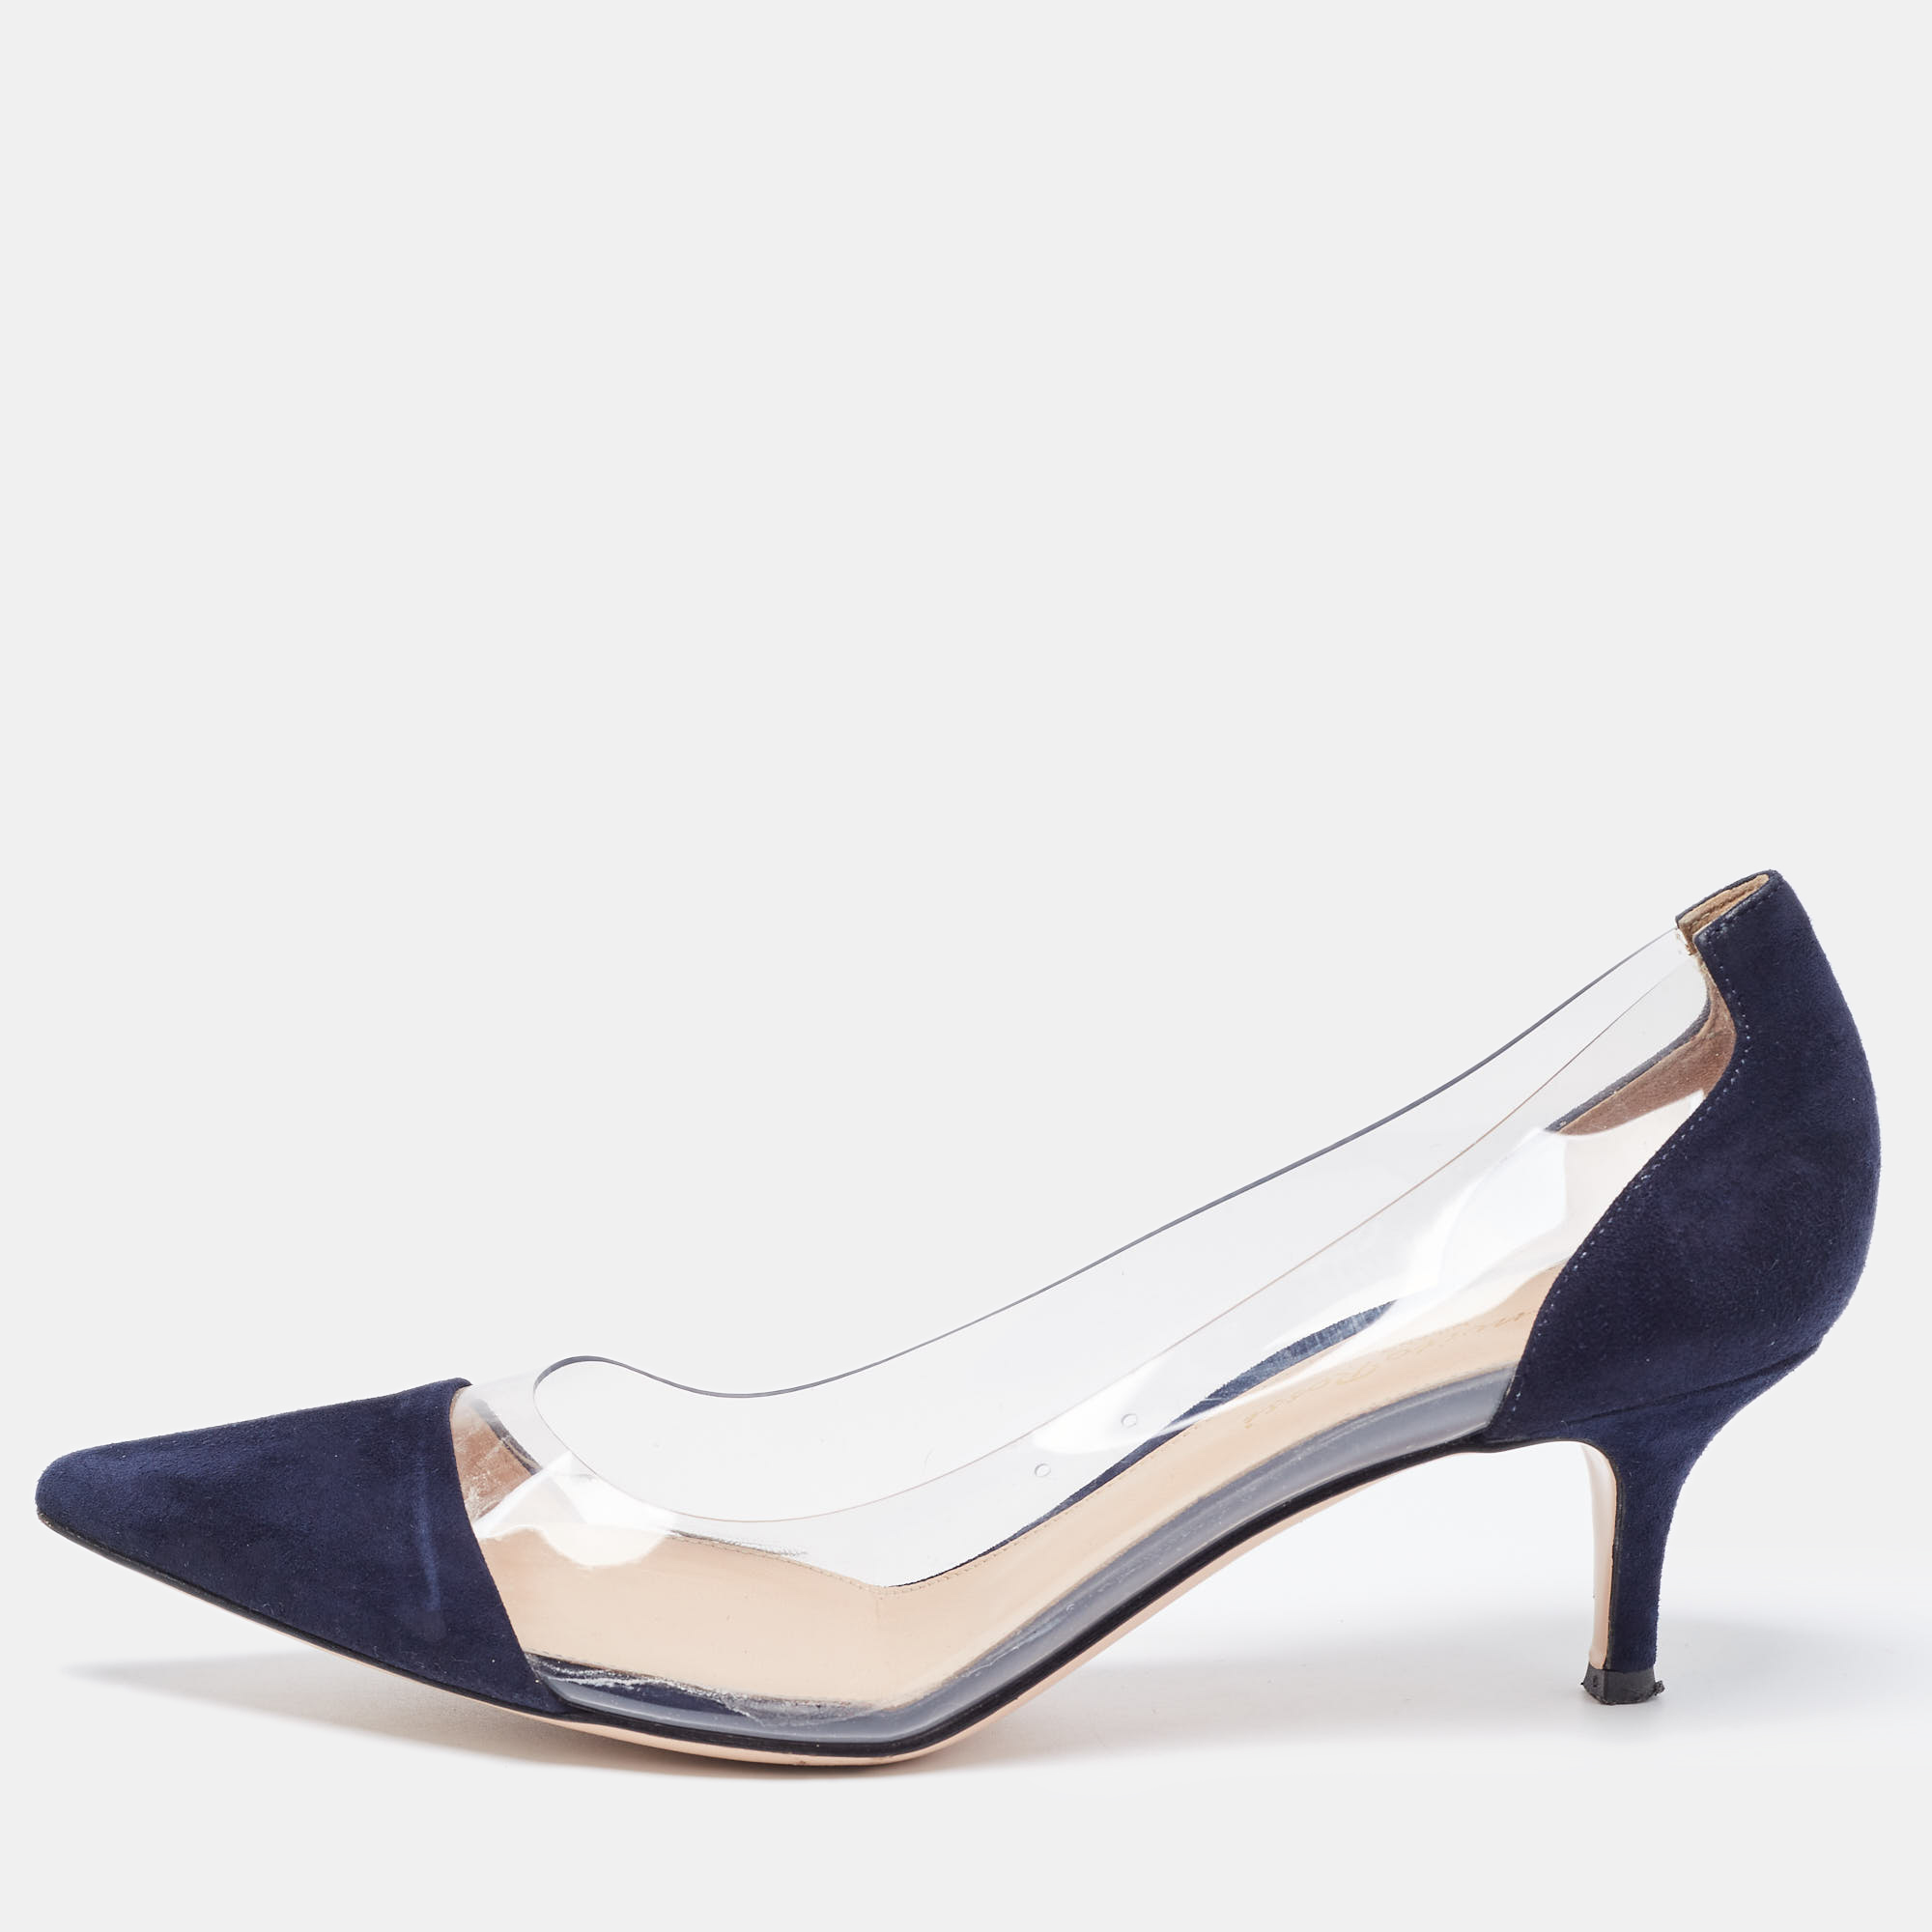 gianvito rossi navy blue suede and pvc plexi pumps size 38.5